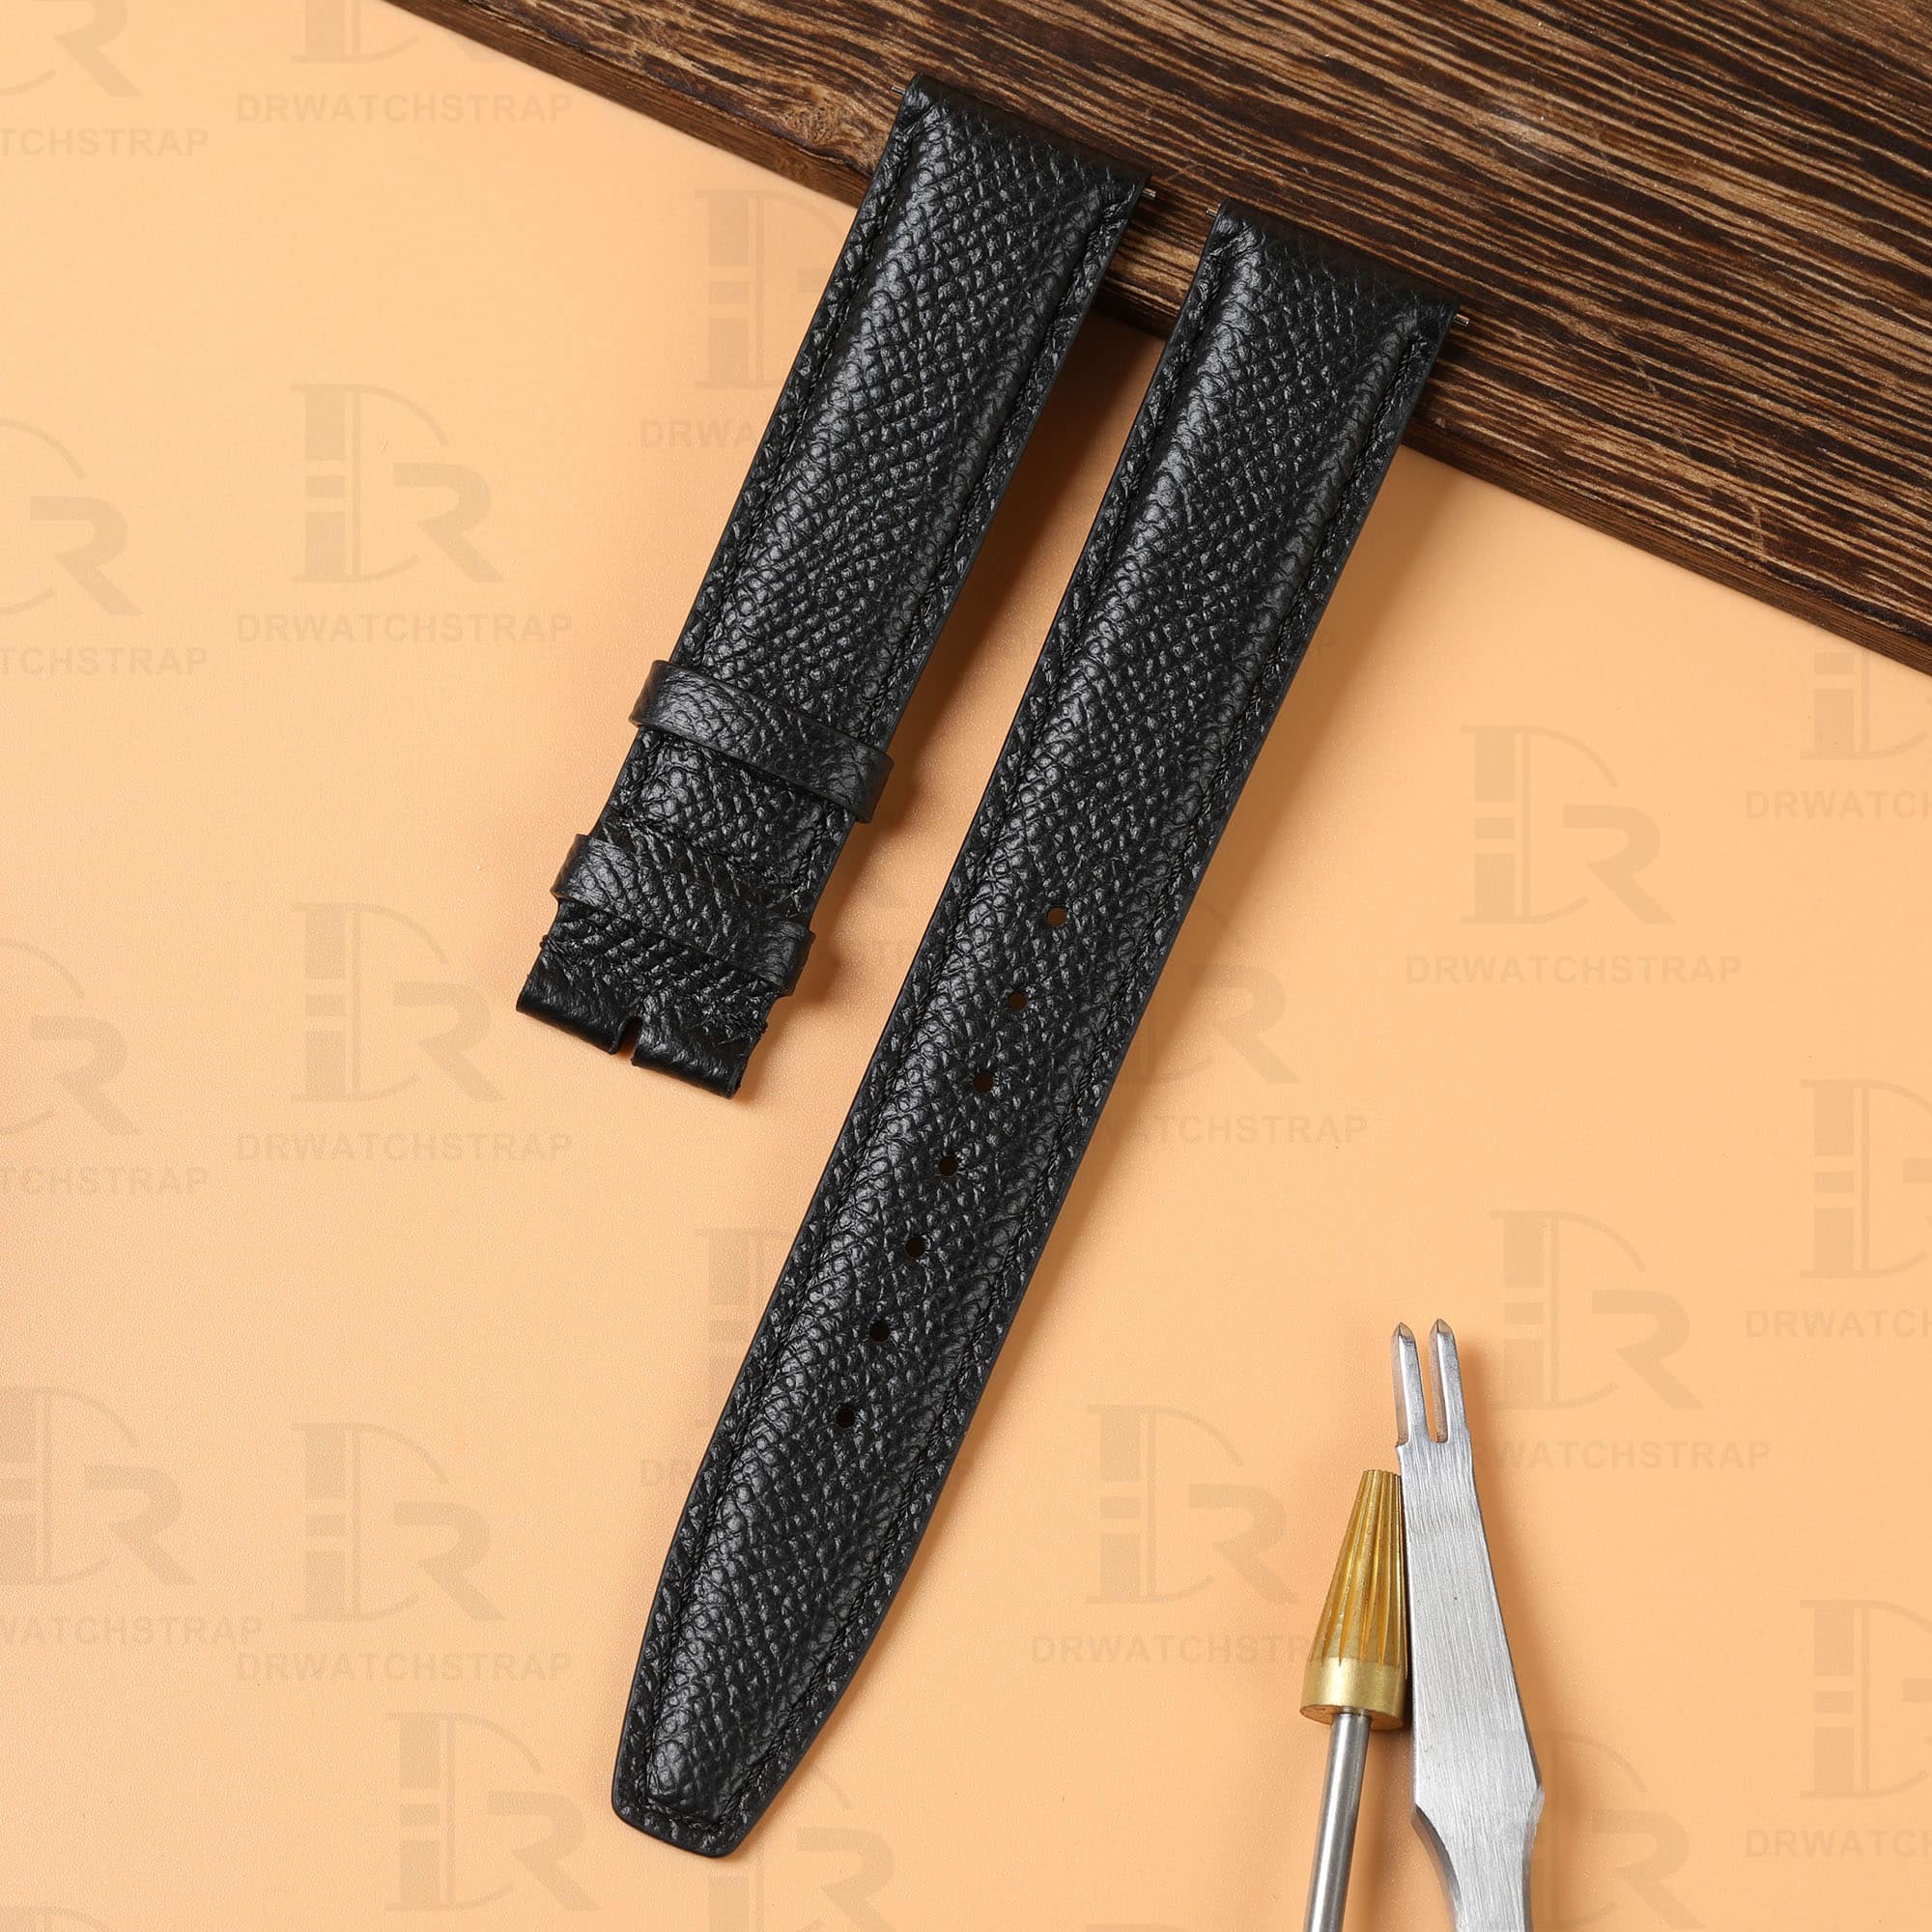 Custom best quality handmade black Epsom leather watch band and strap replacement for IWC Big Pilot Top Gun 20mm 21mm 22mm luxury watches online - Shop the premium aftermarket OEM leather straps and watchbands for sale at a low price